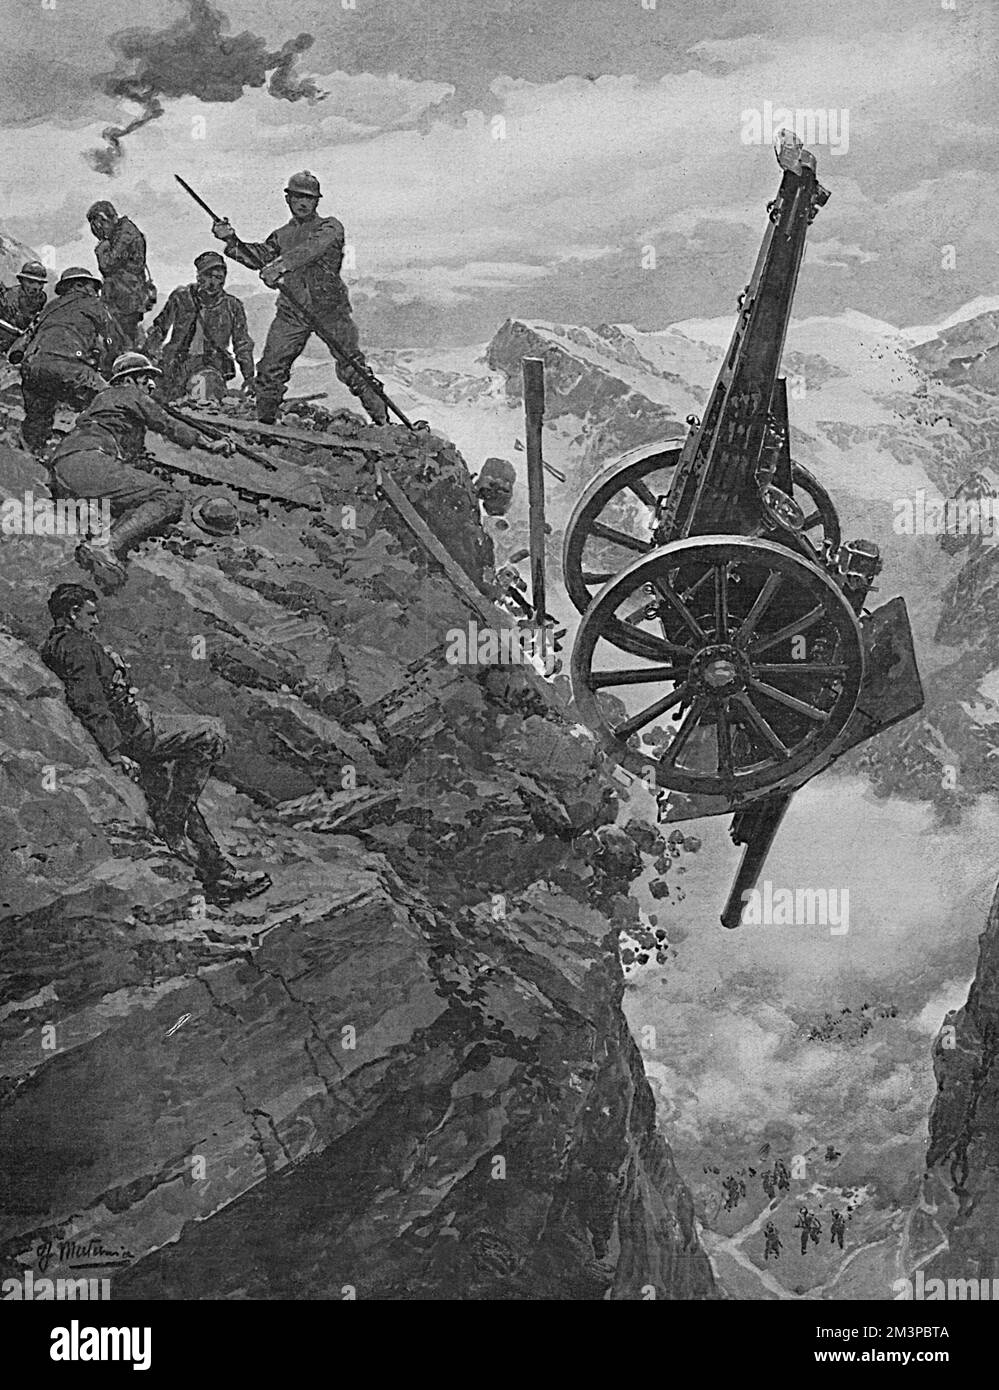 Retreating in the face of an Austrian advance, Italian artillerymen pitch their gun over a mountain precipice into the valley below, preferring to destroy the weapon rather than risk it falling into enemy hands     Date: 1917 Stock Photo